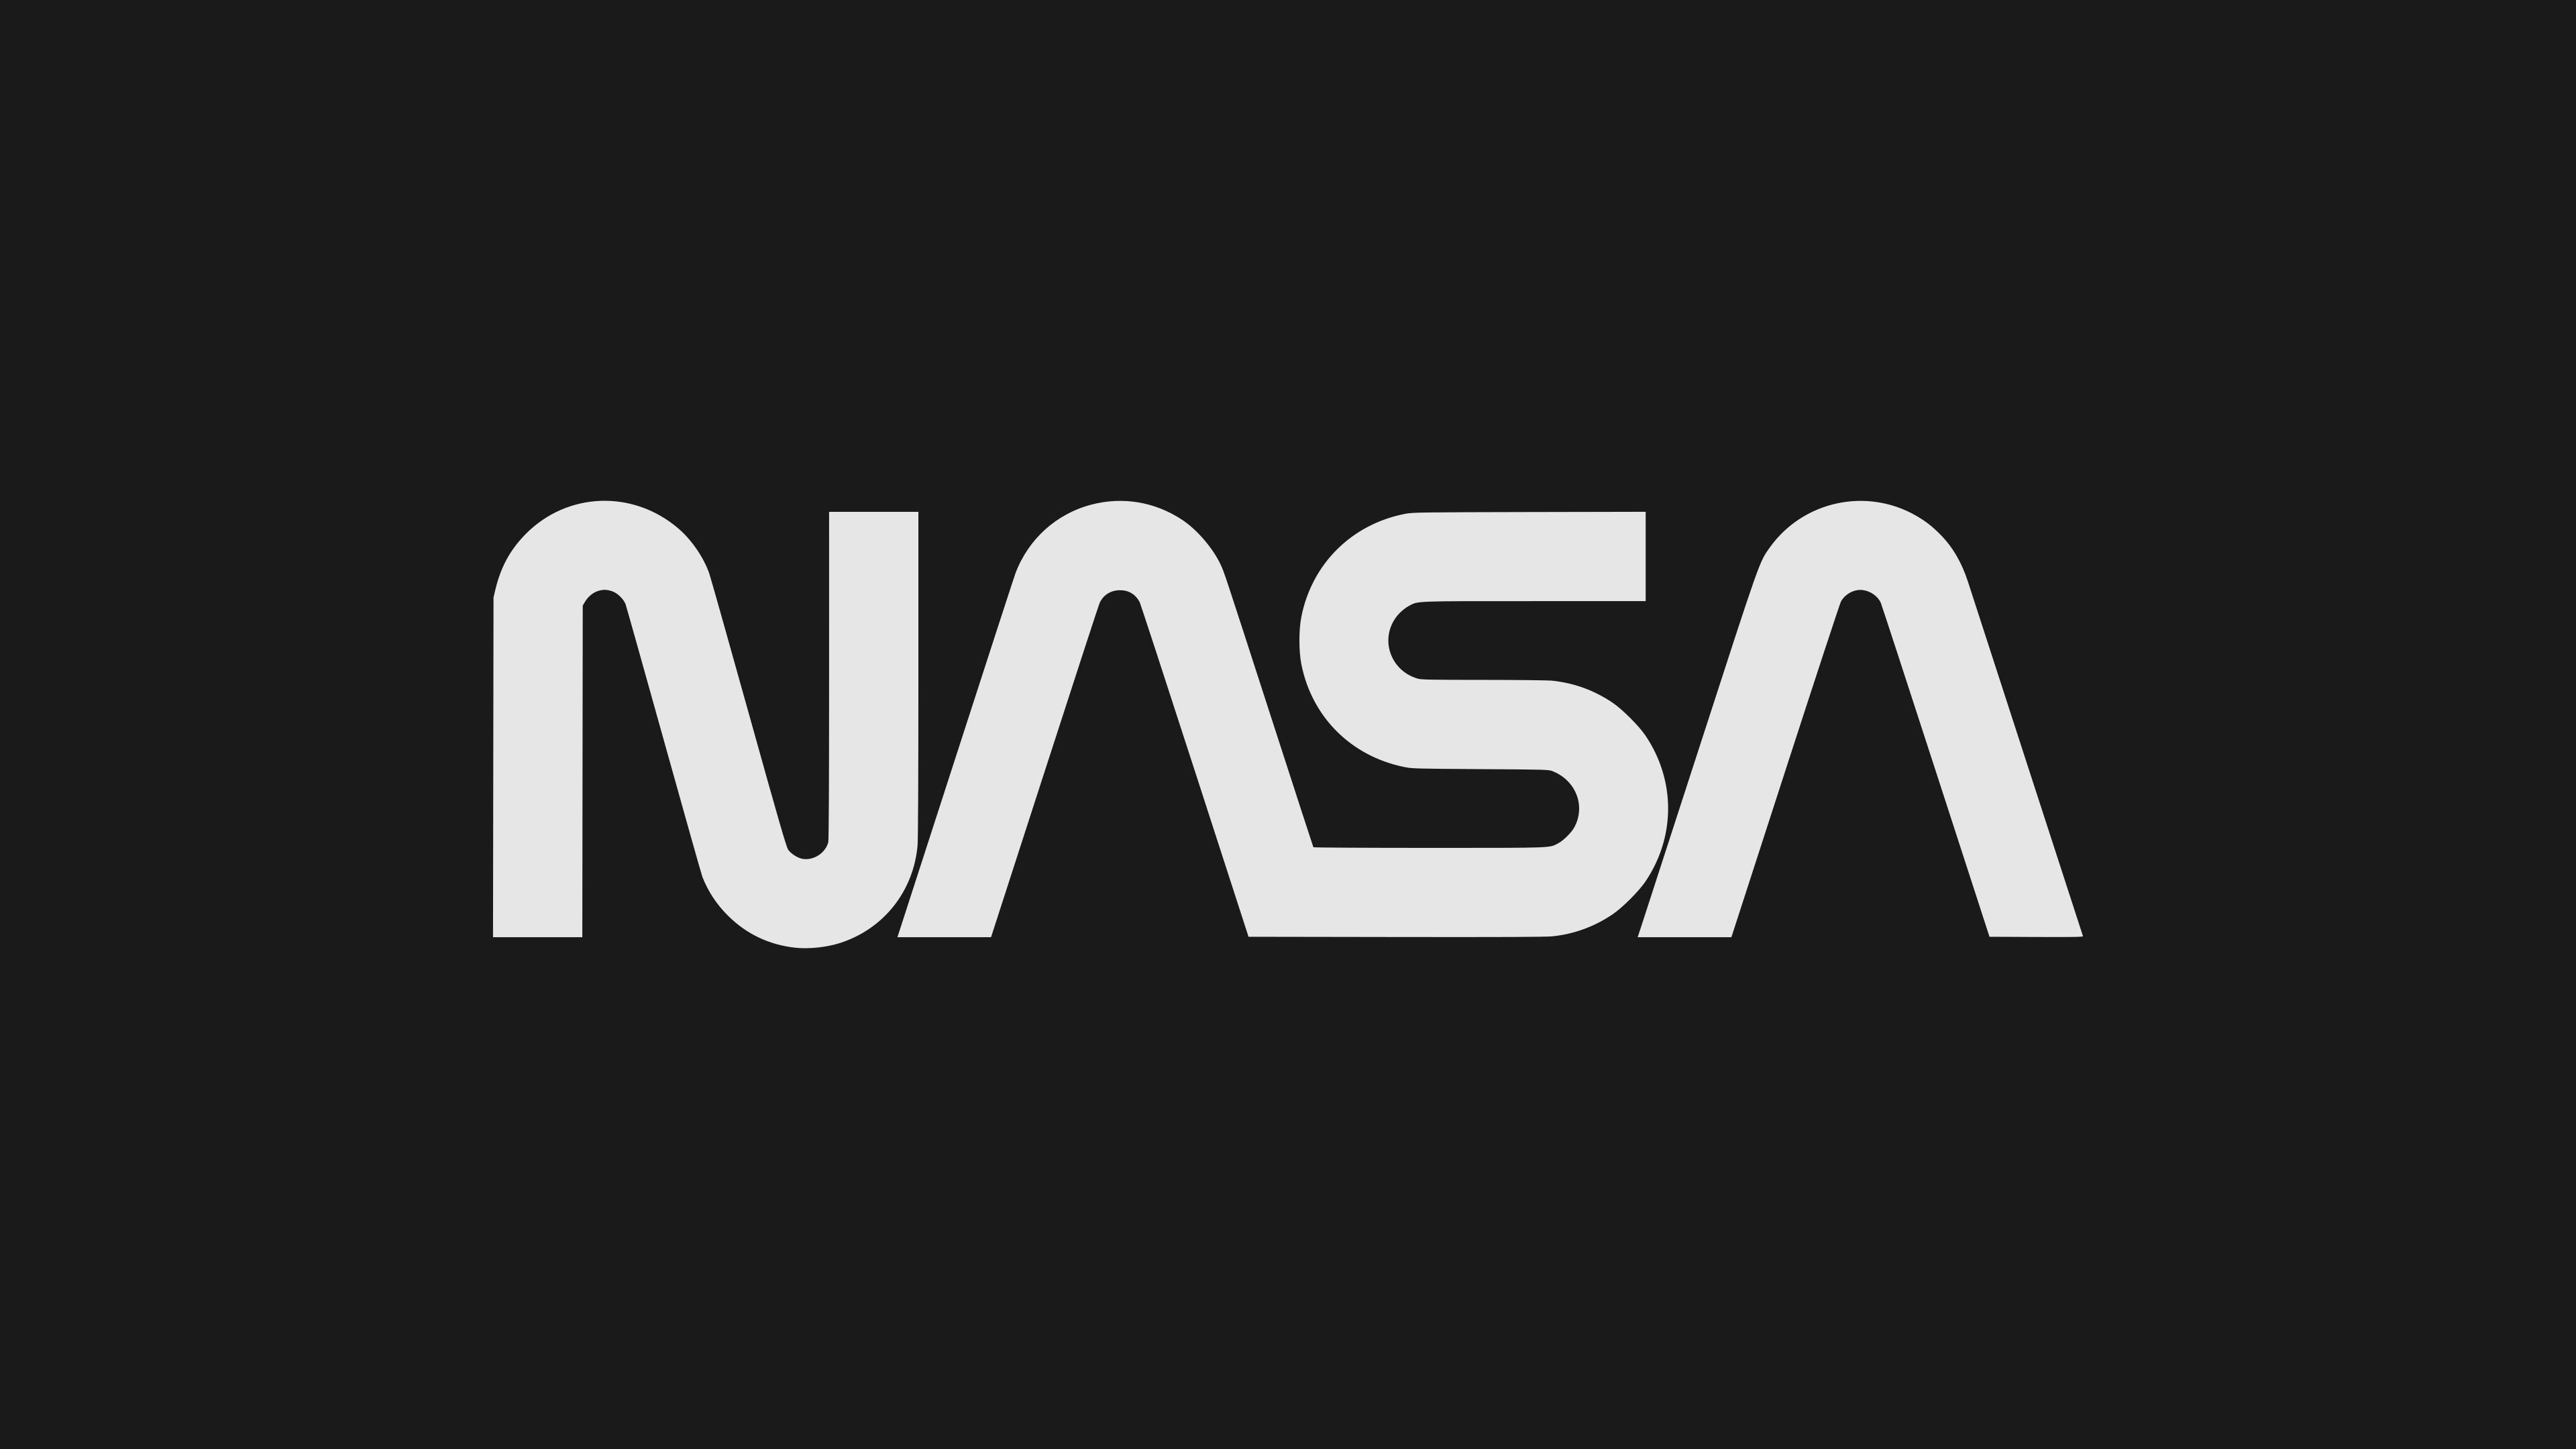  nasa  wallpapers  4k  for your phone and desktop screen